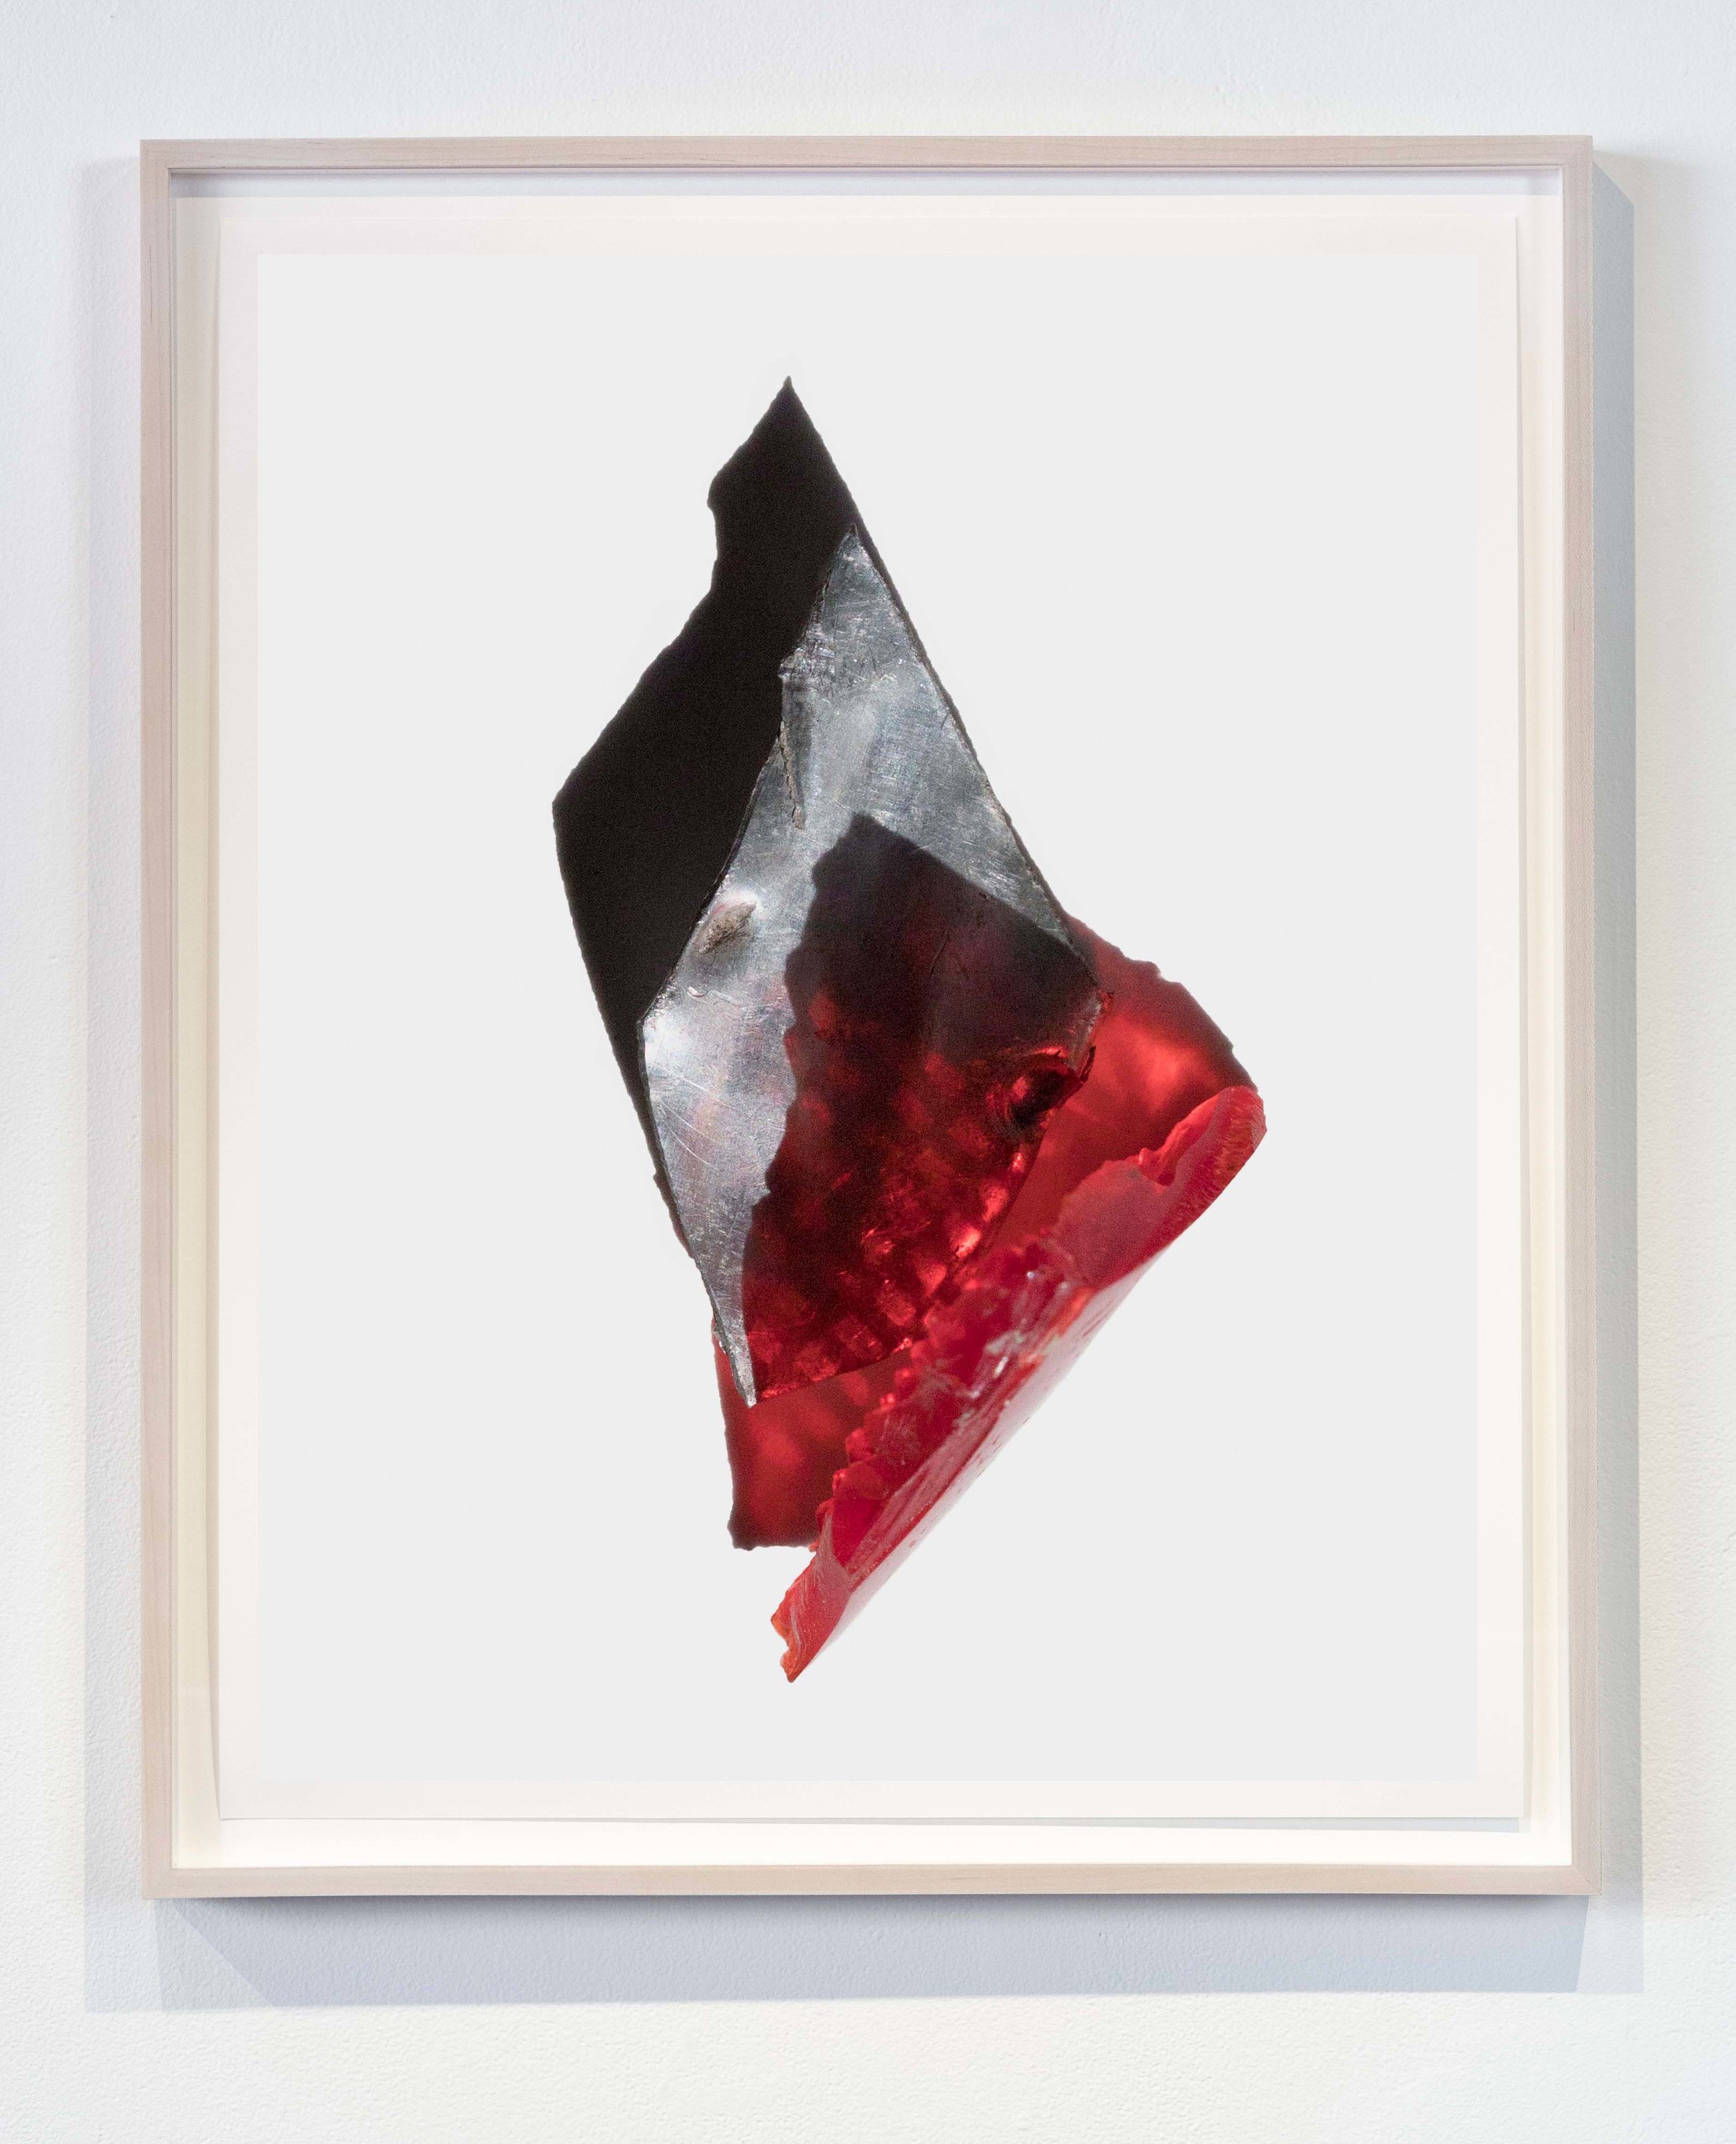  Sharp Metal Red Plastic  archival pigment print 20x25 inches 